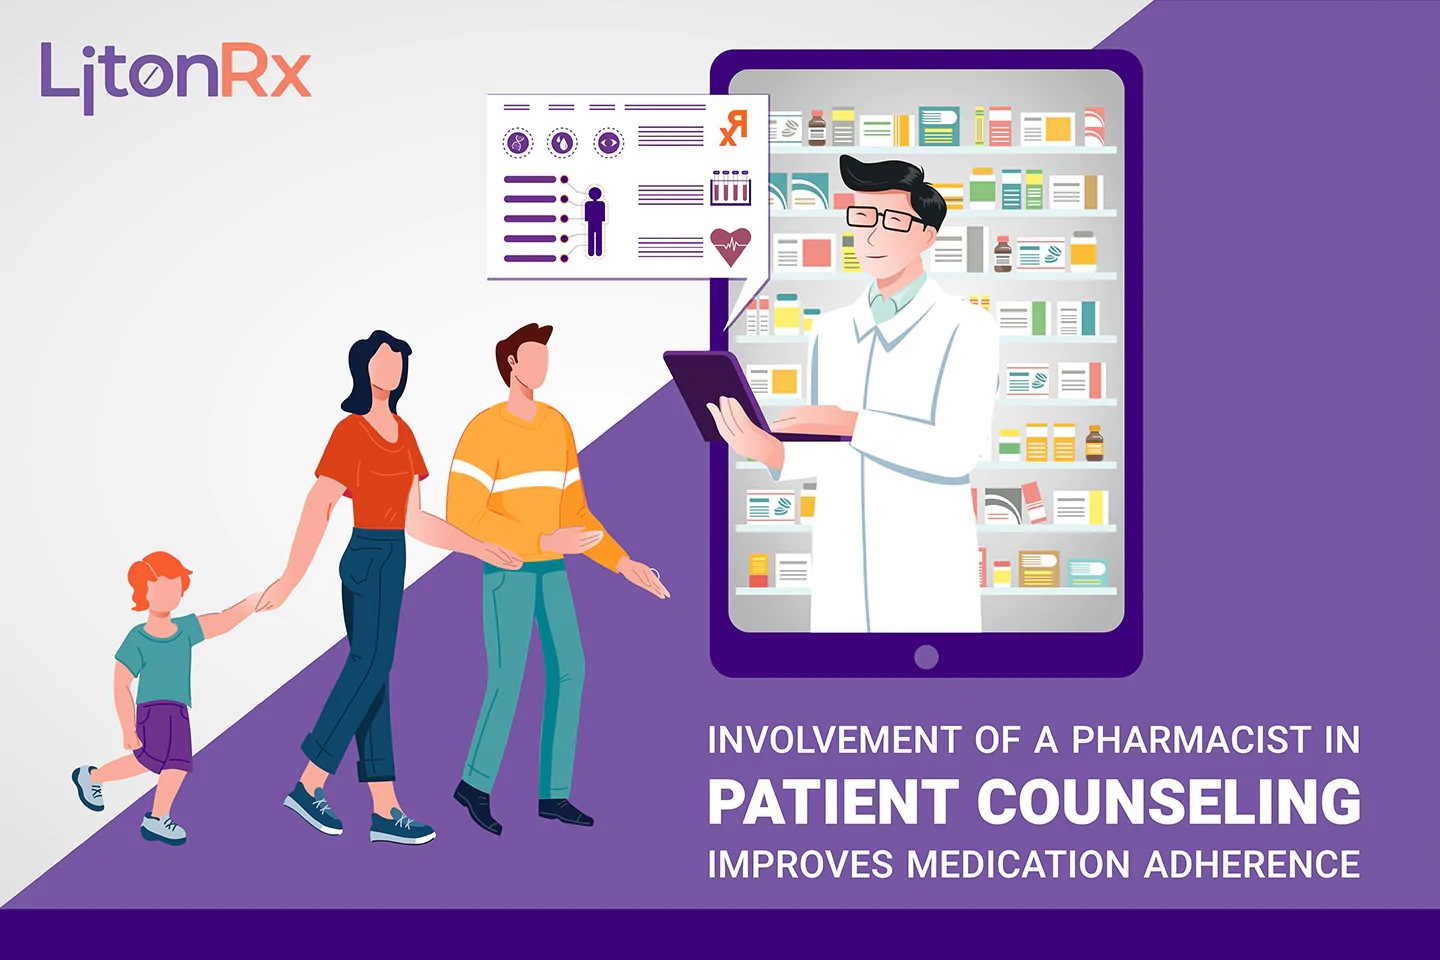 Involvement of a pharmacist in patient counseling improves medication adherence